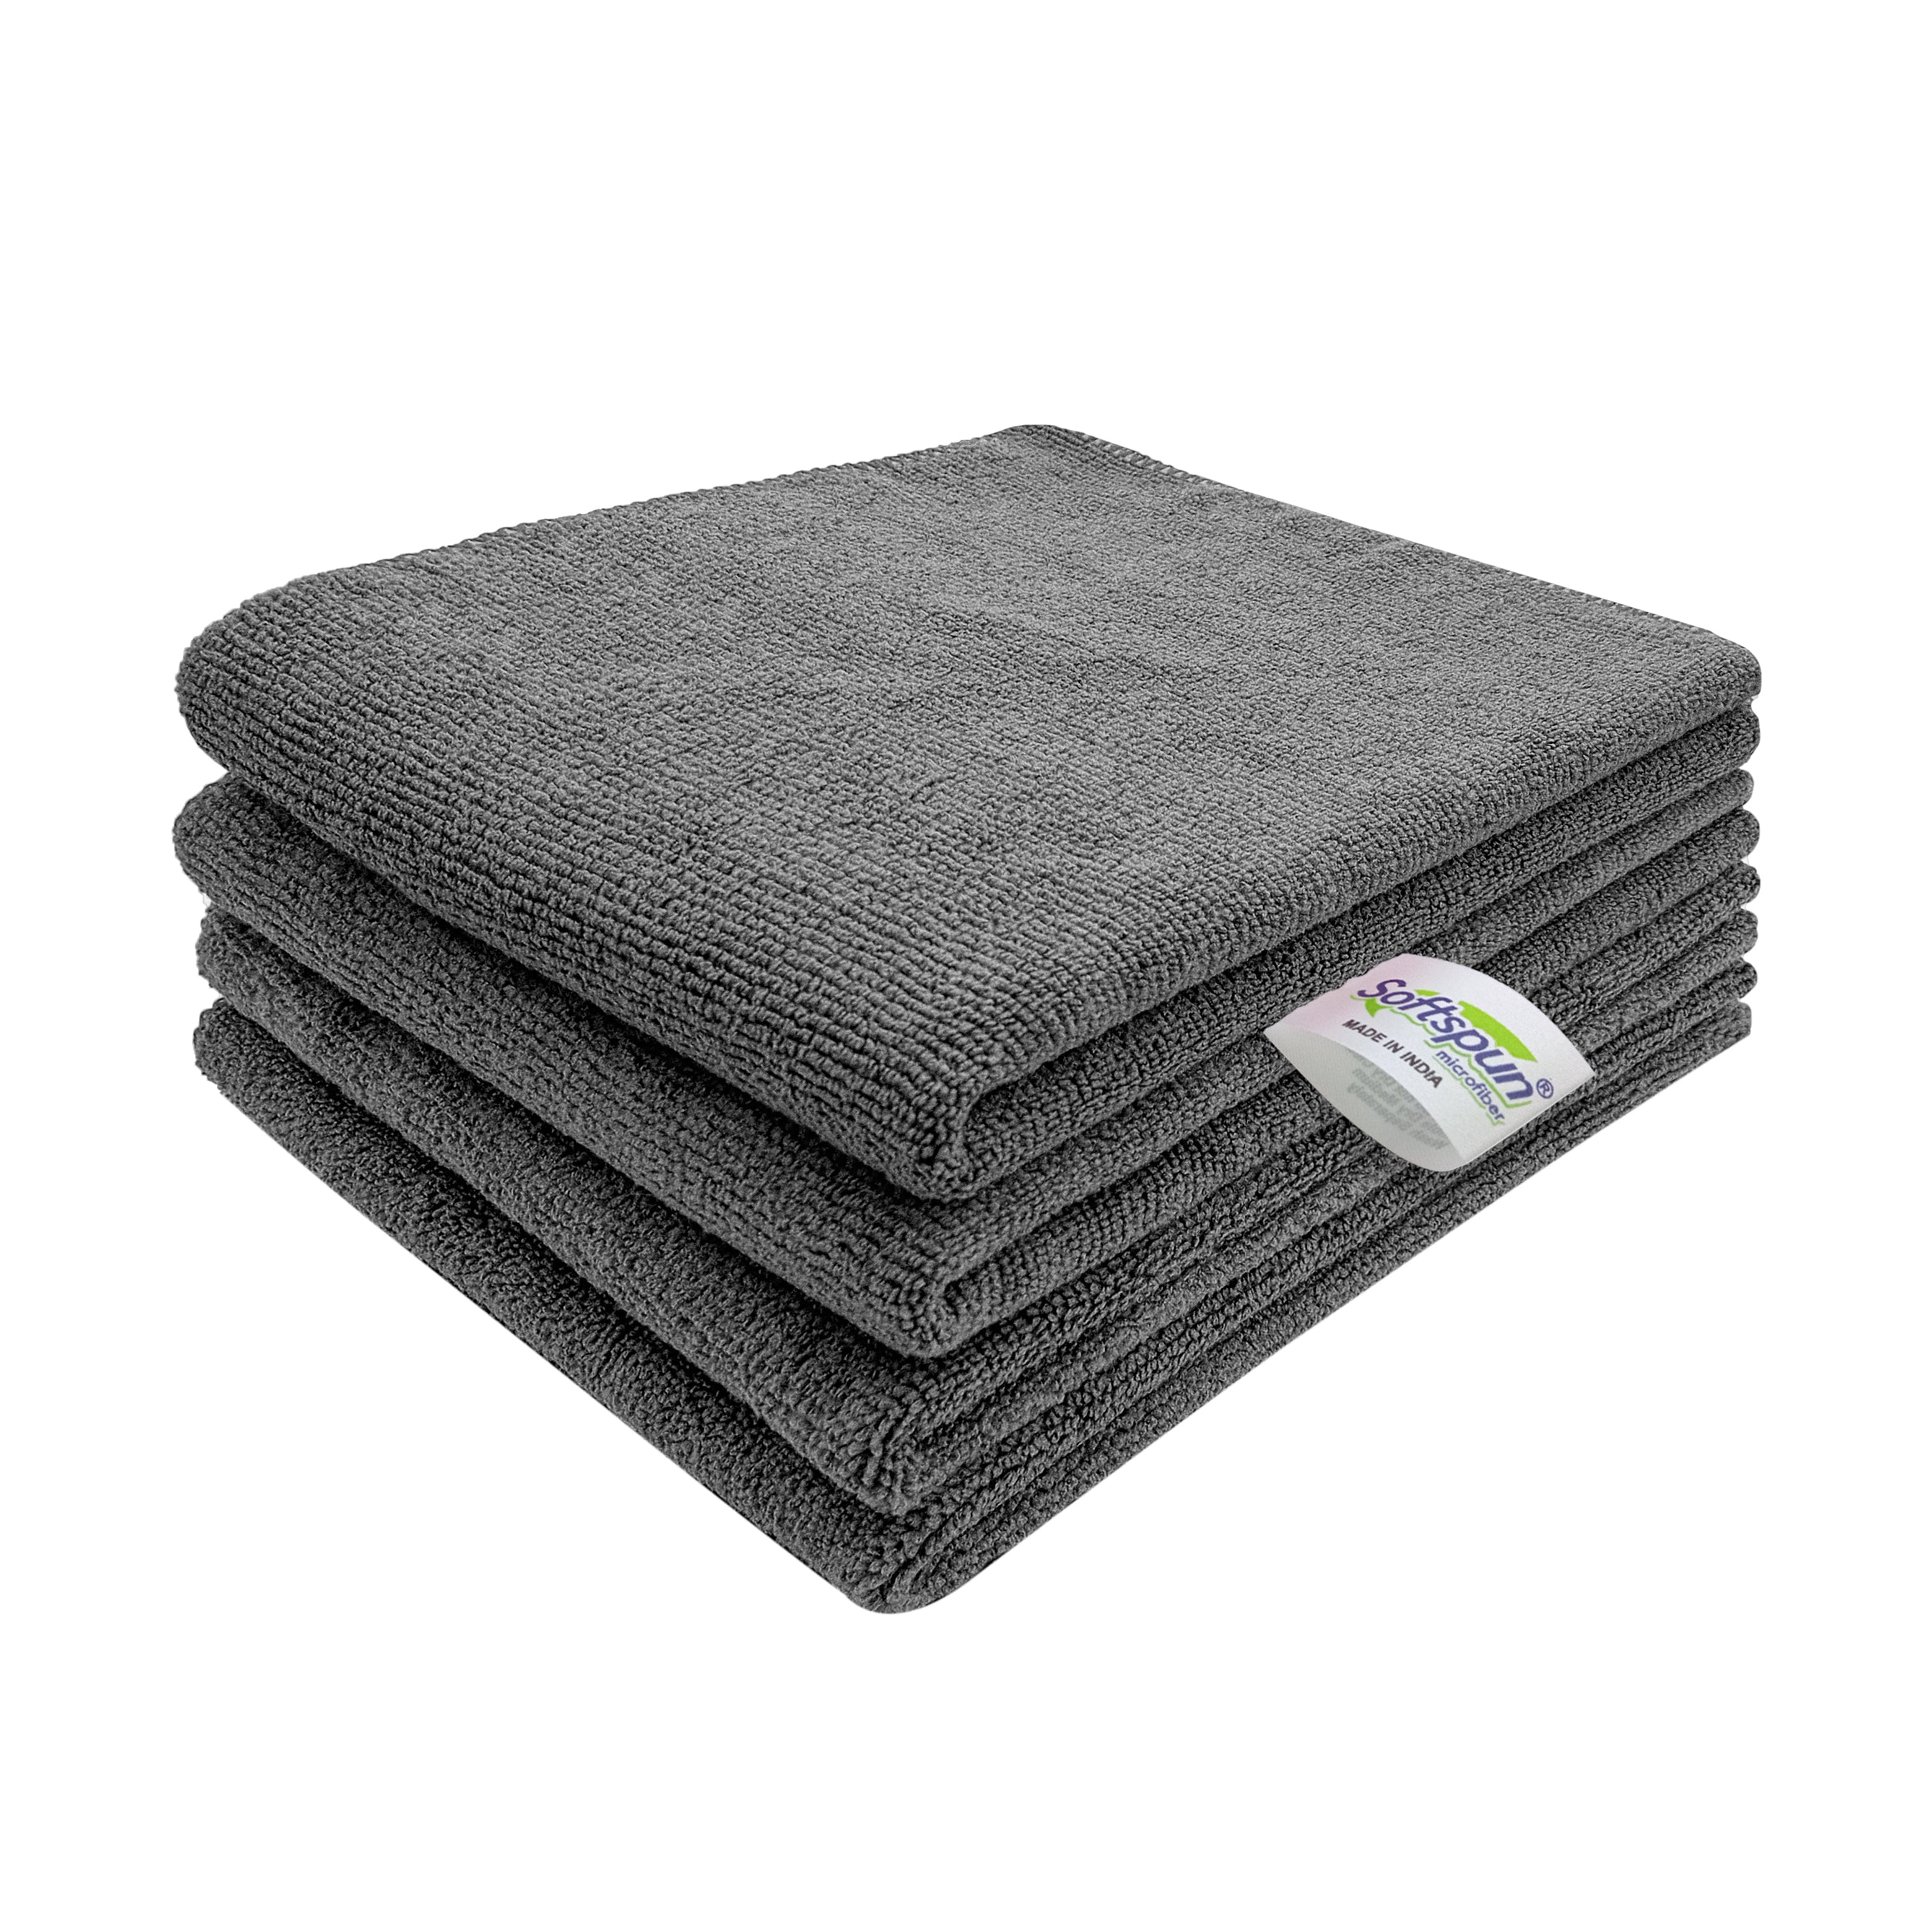 340 GSM cleaning cloths for cars - Softspun